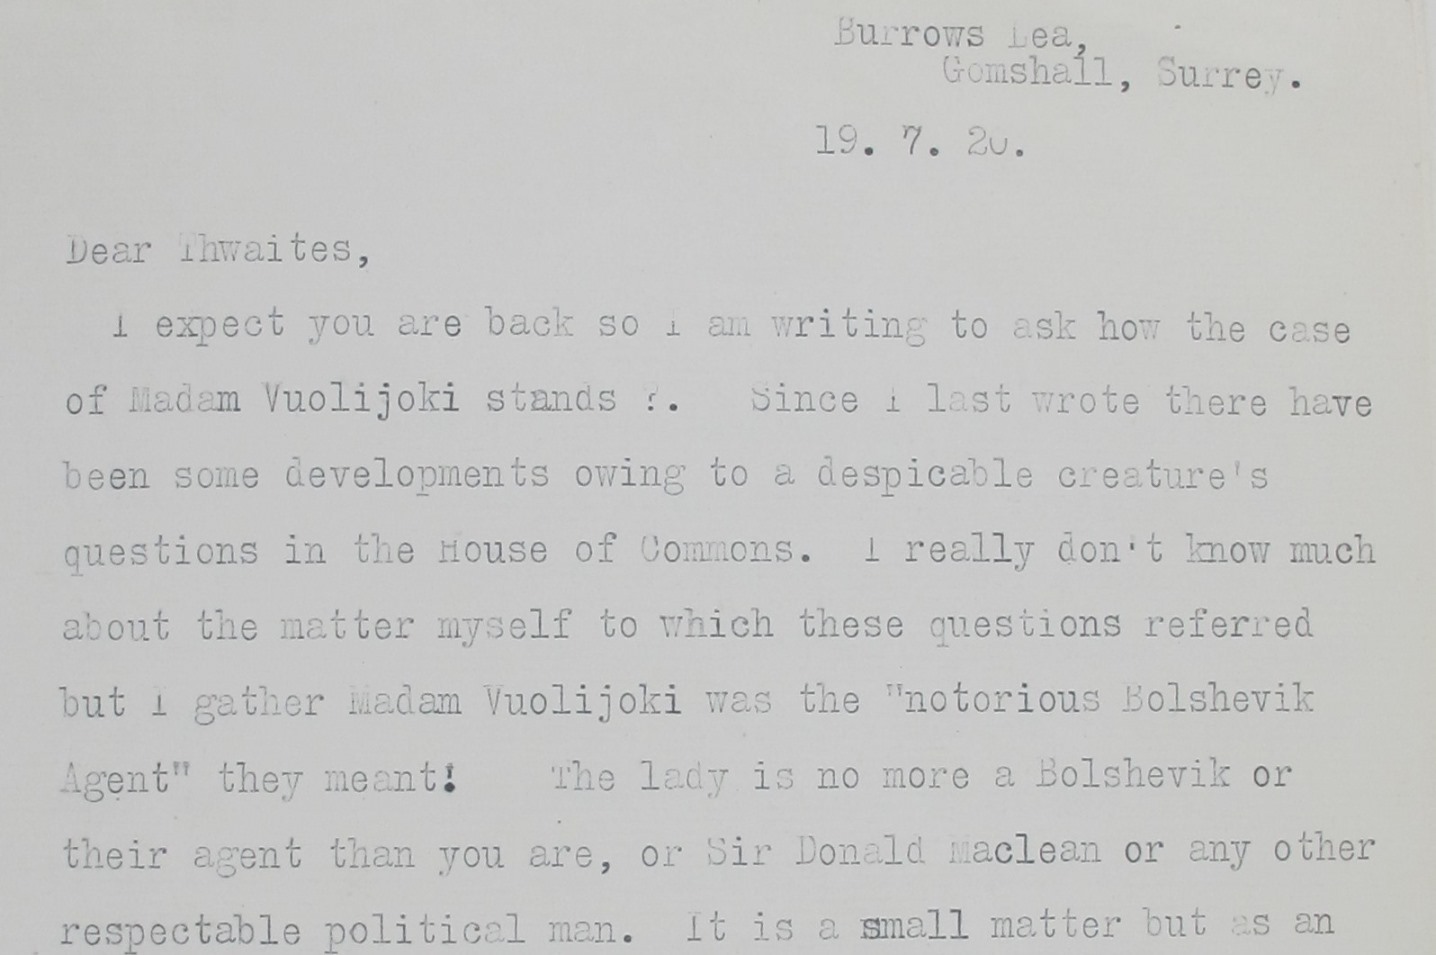 Image of a typed letter from Gough to William Thwaites